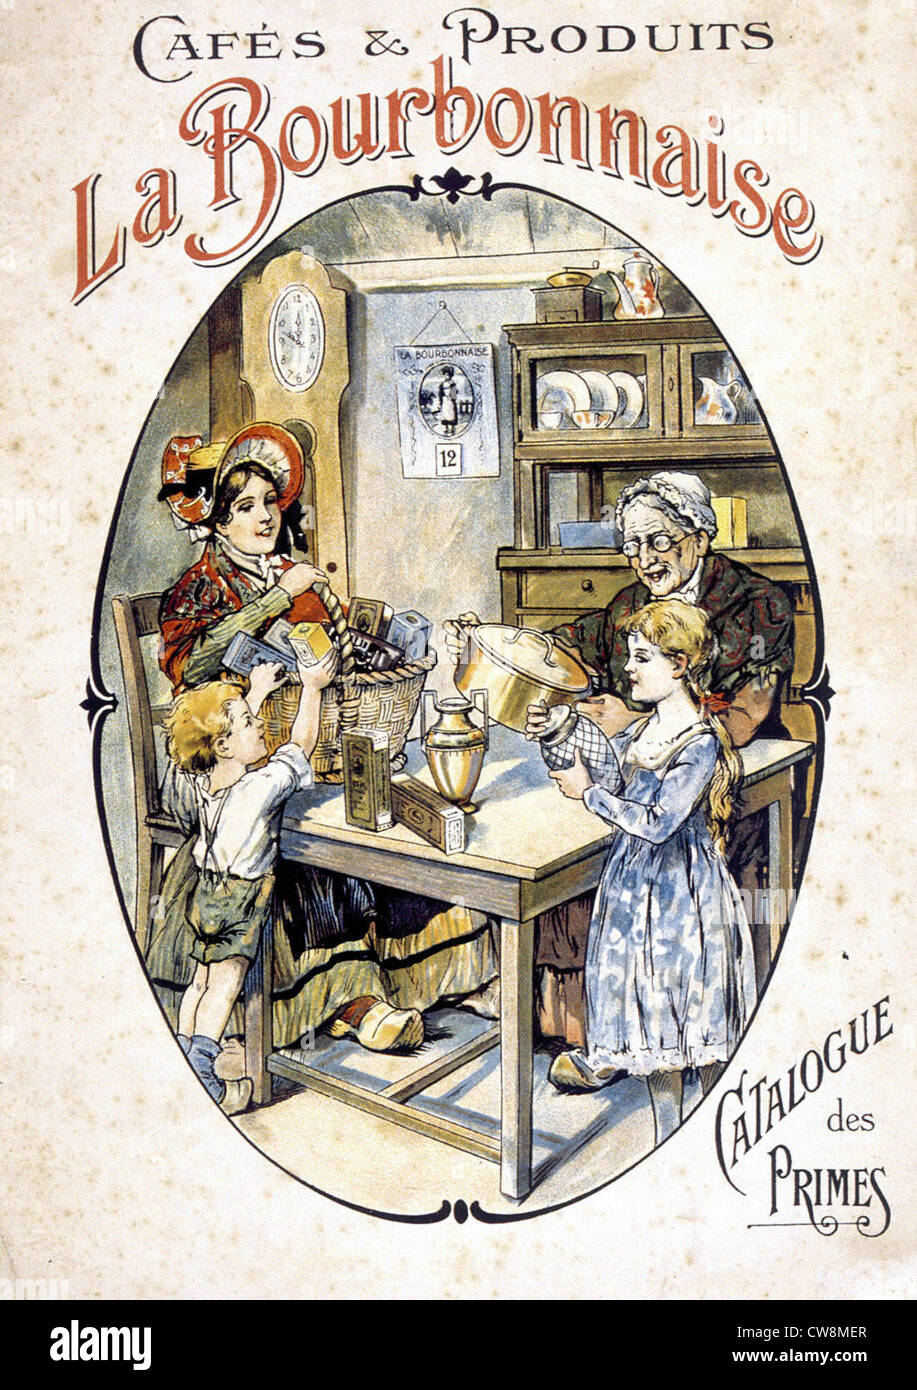 Café, advertisement from the late 19th century Stock Photo